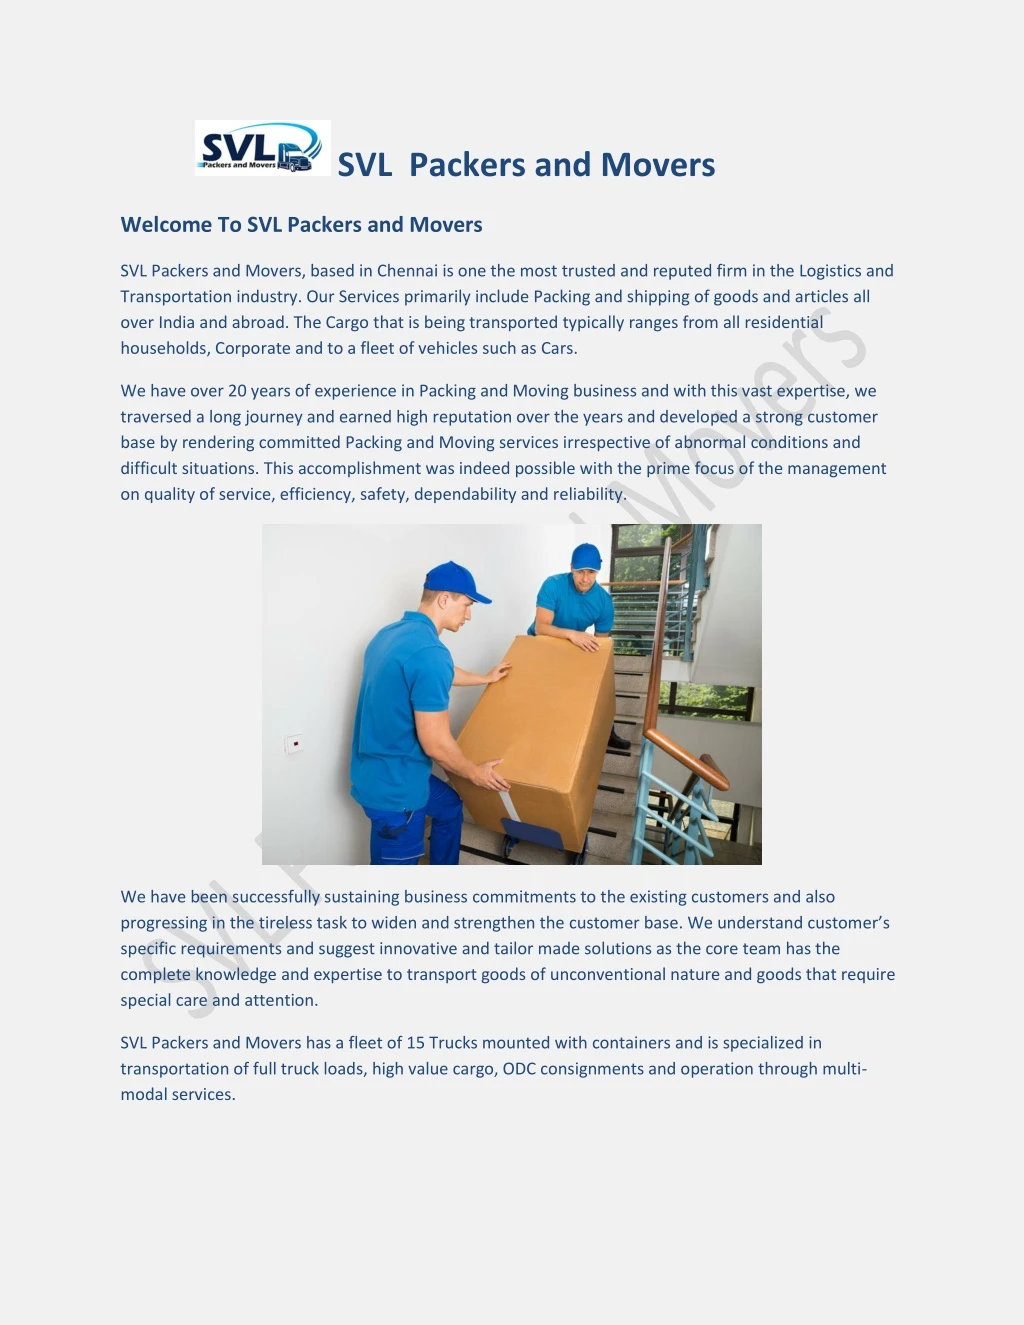 svl packers and movers